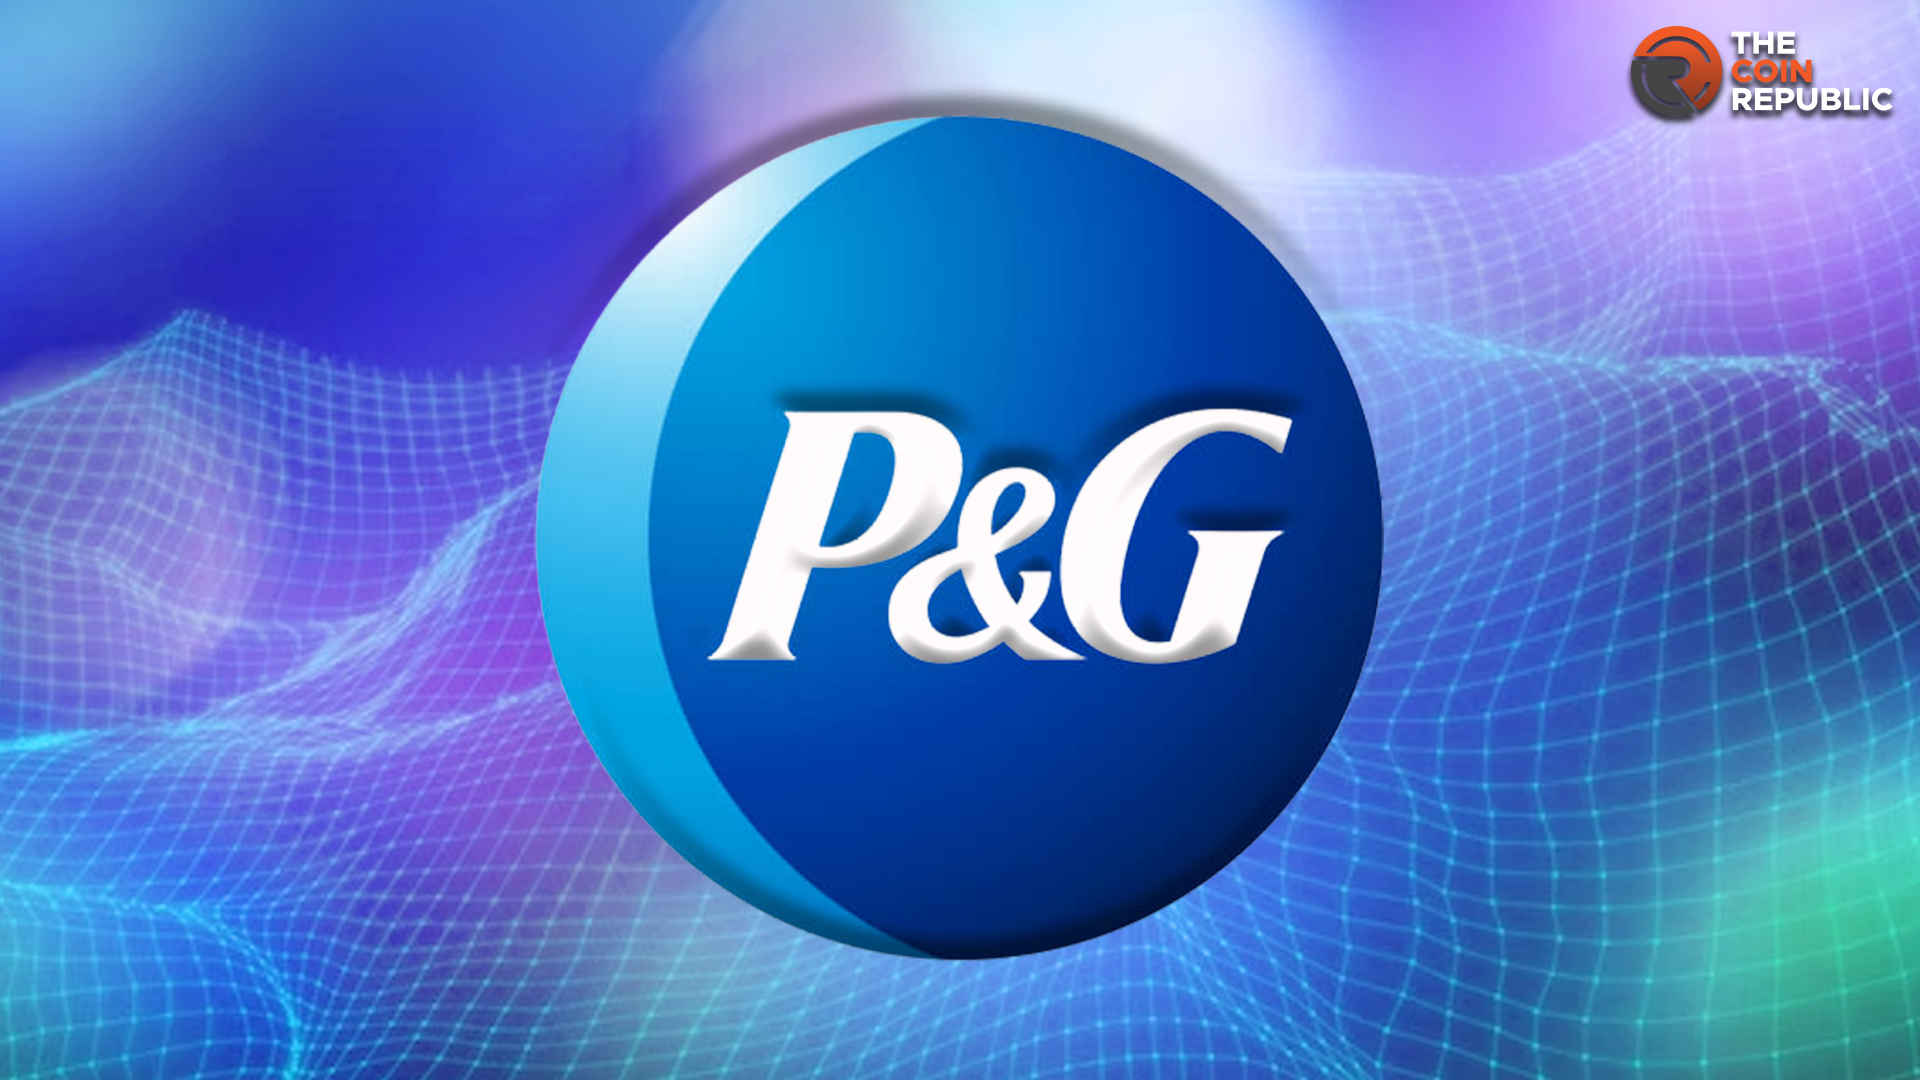 PG Stock: Will PG Surpass Hurdles and Go For New Peaks Or Fall?